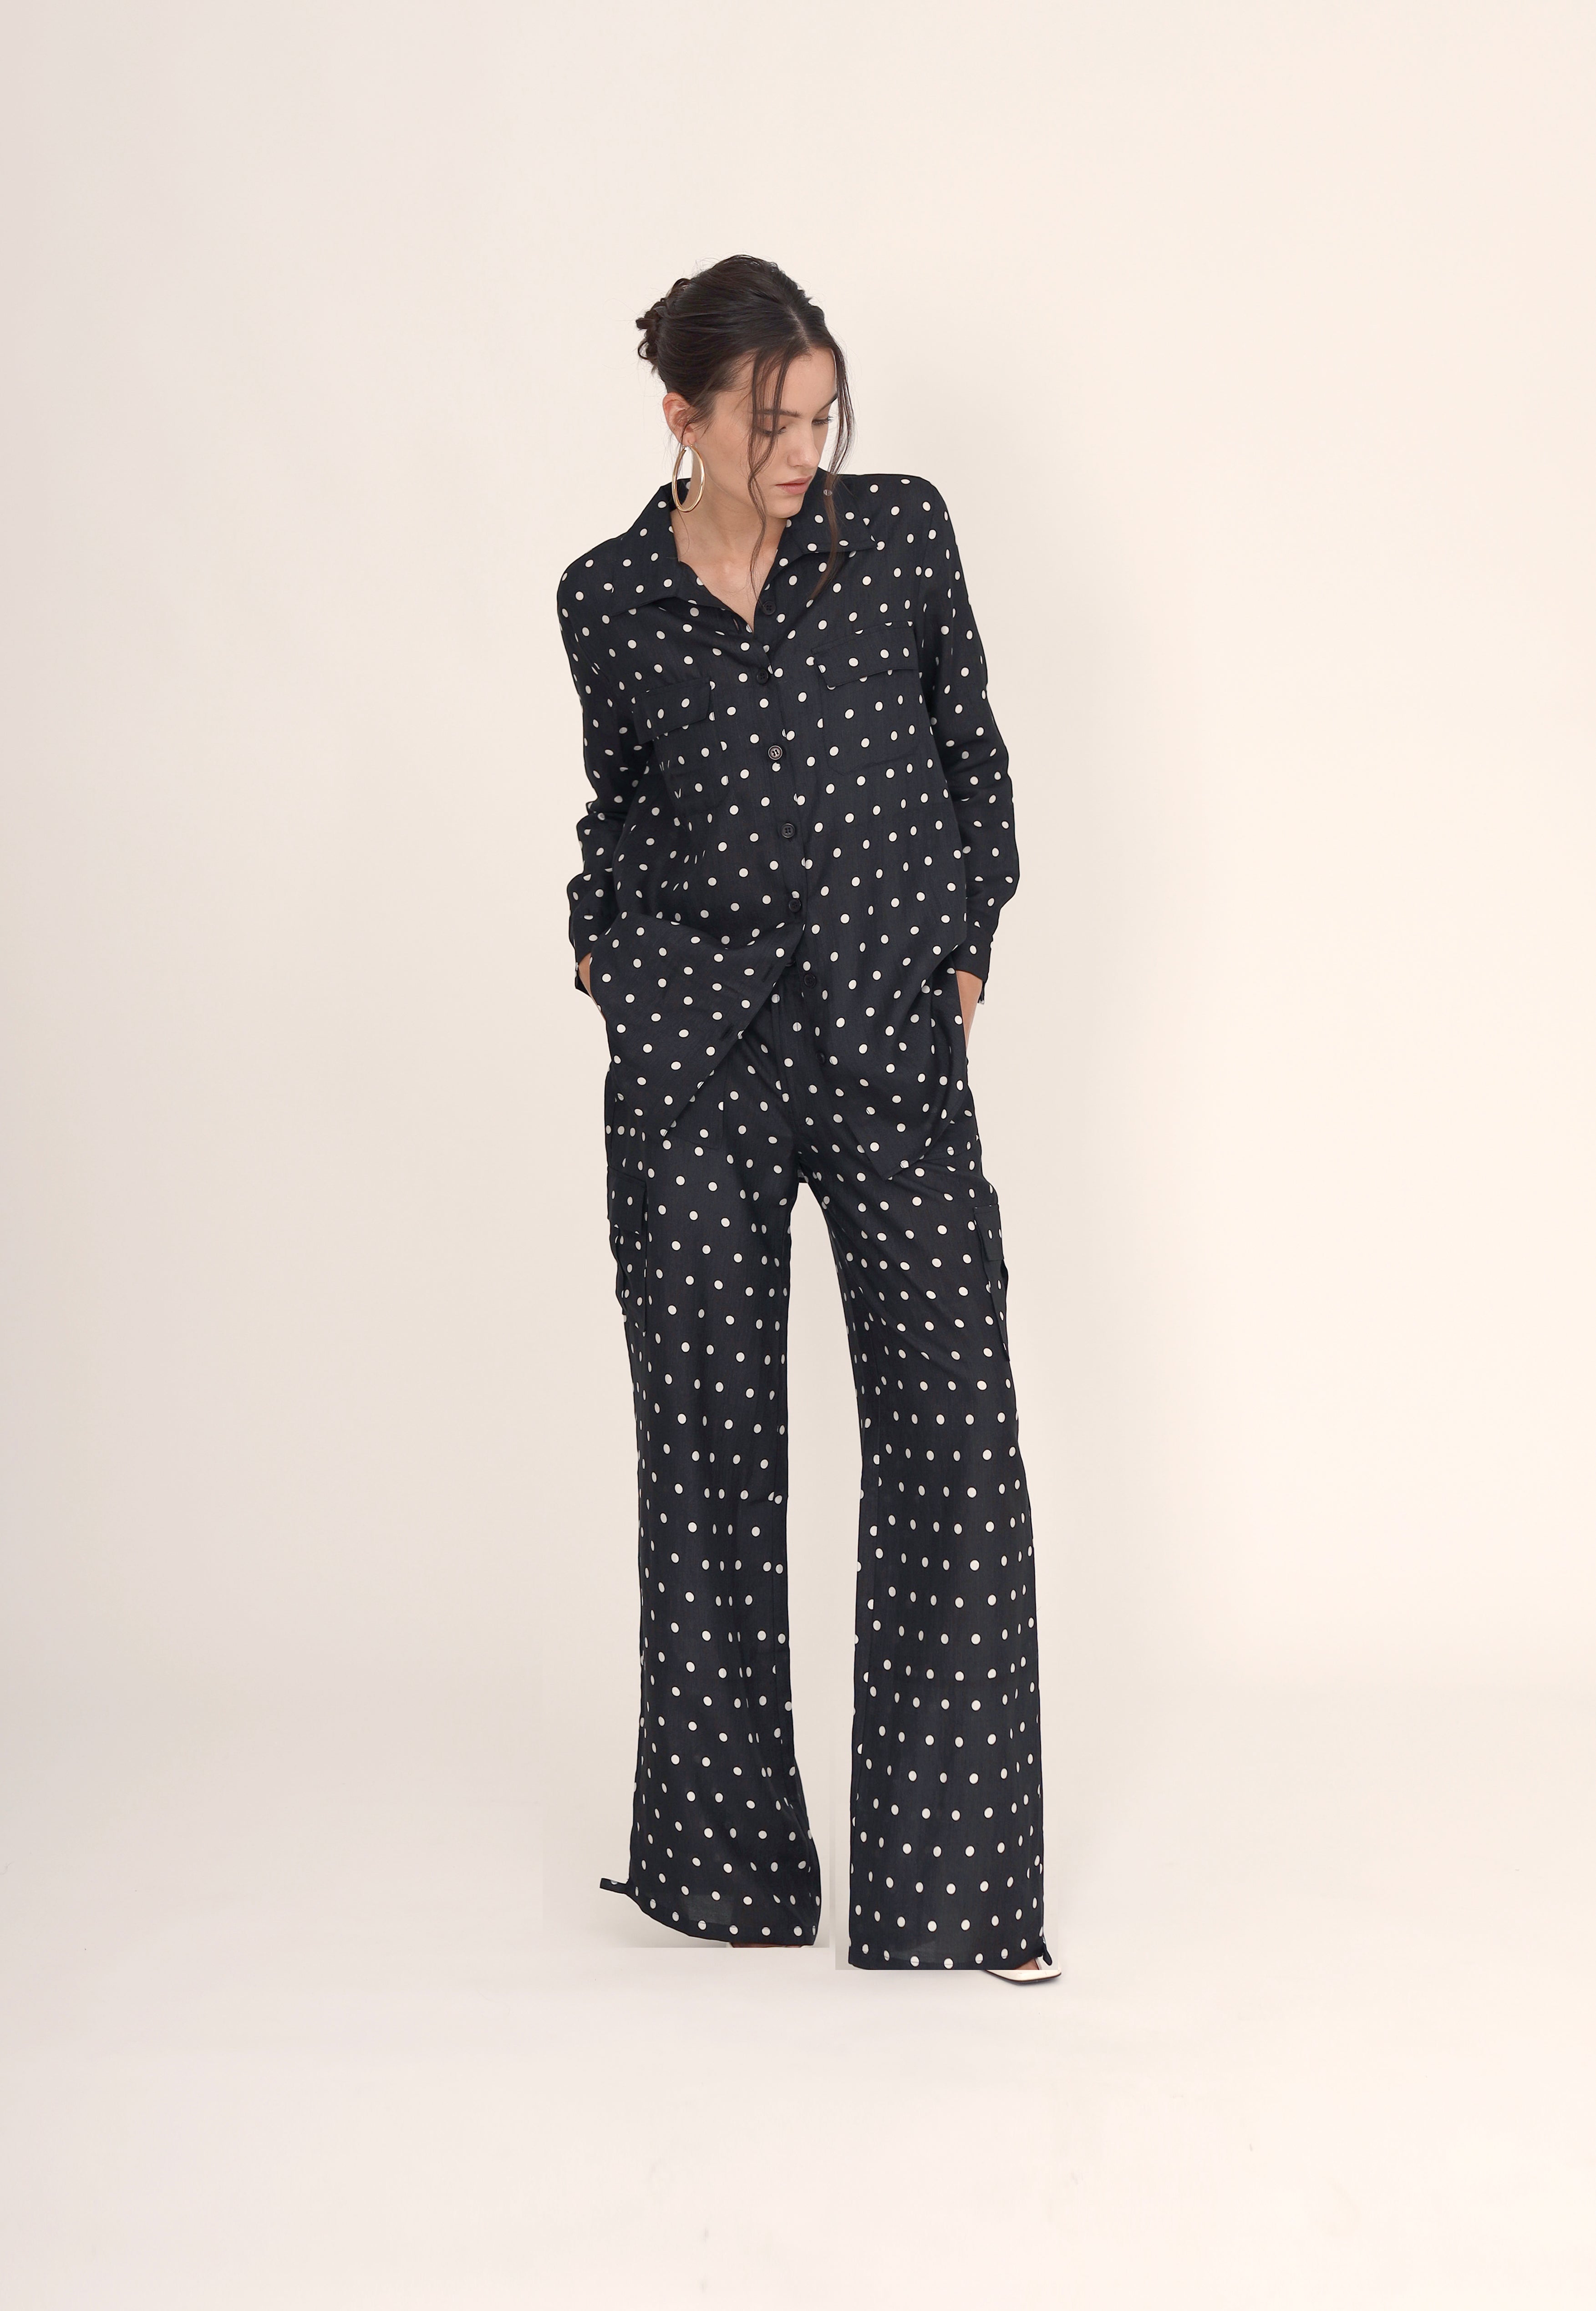 Timeless maxi shirt - Black and white dots